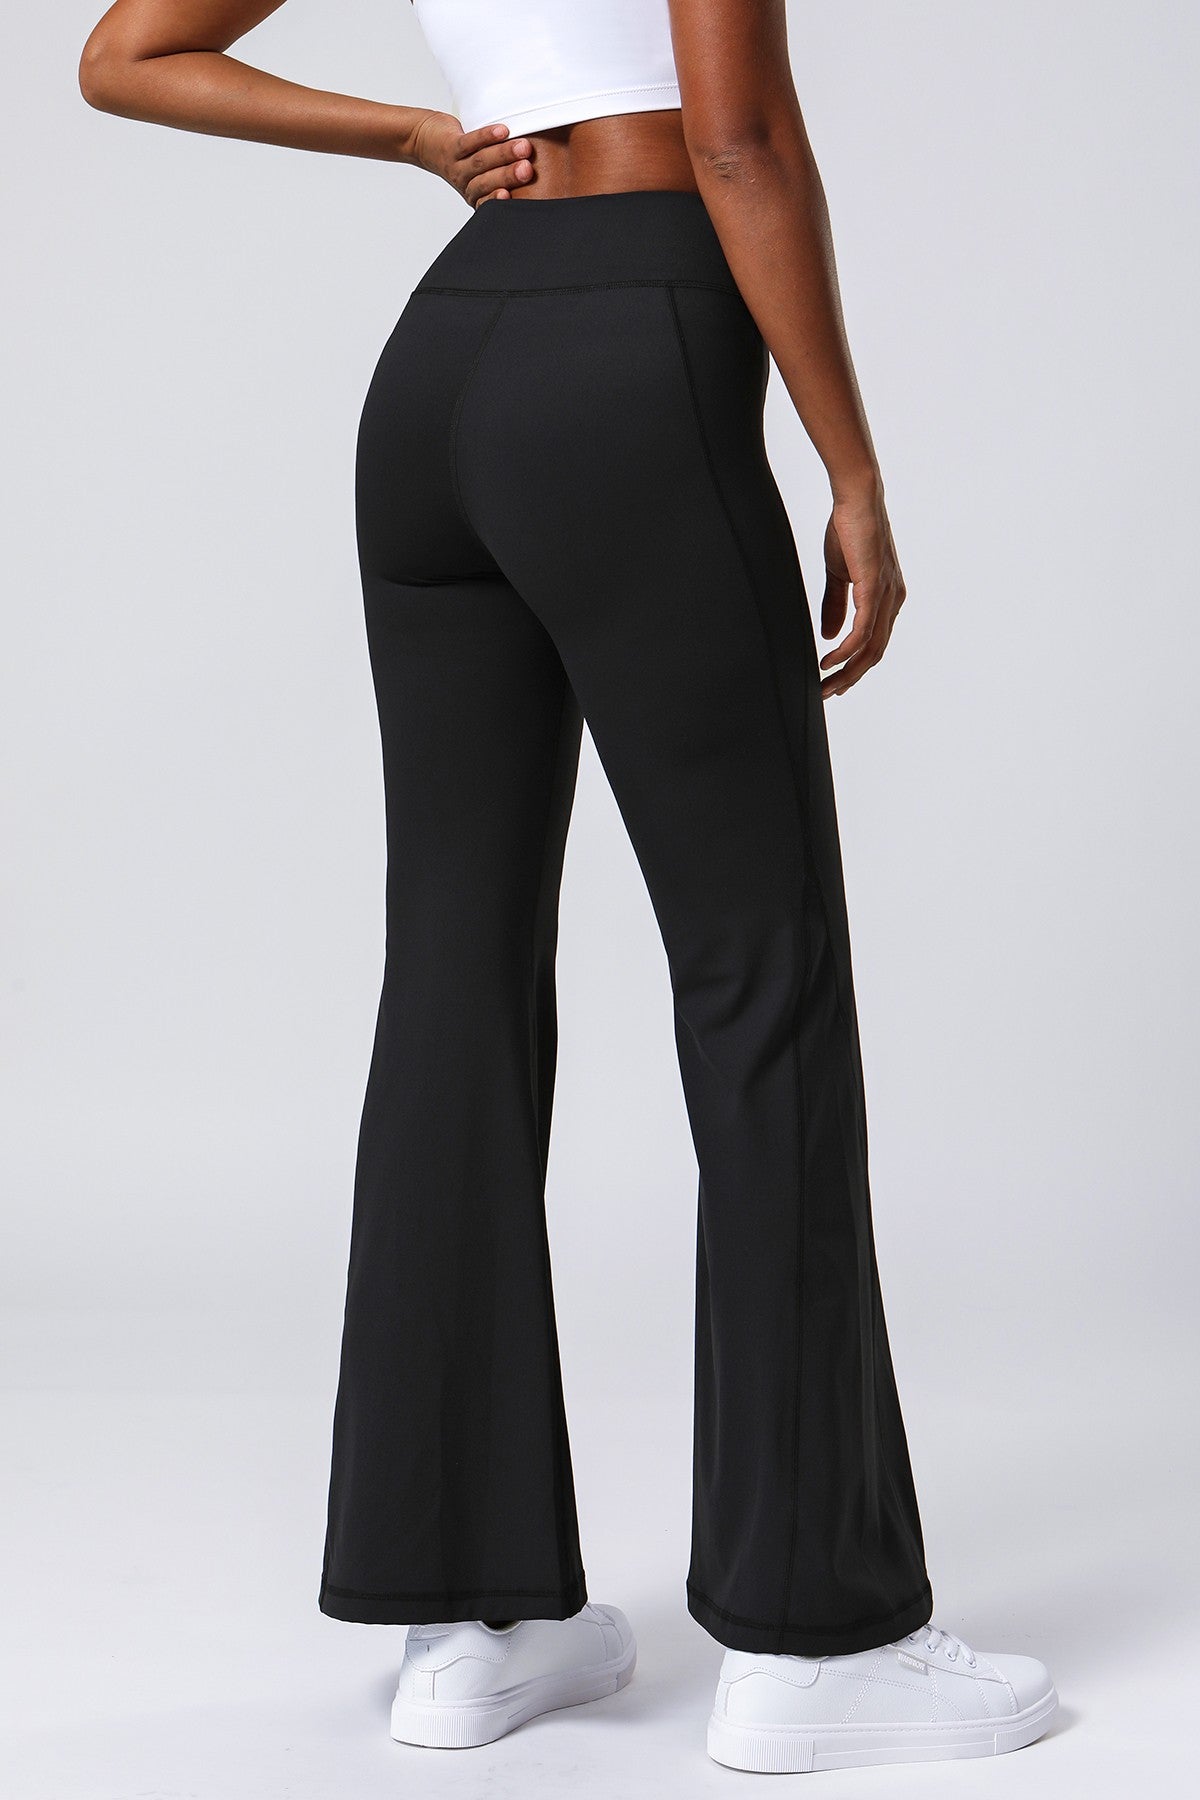 New style Tummy Control Flared Trousers for Women High Waisted